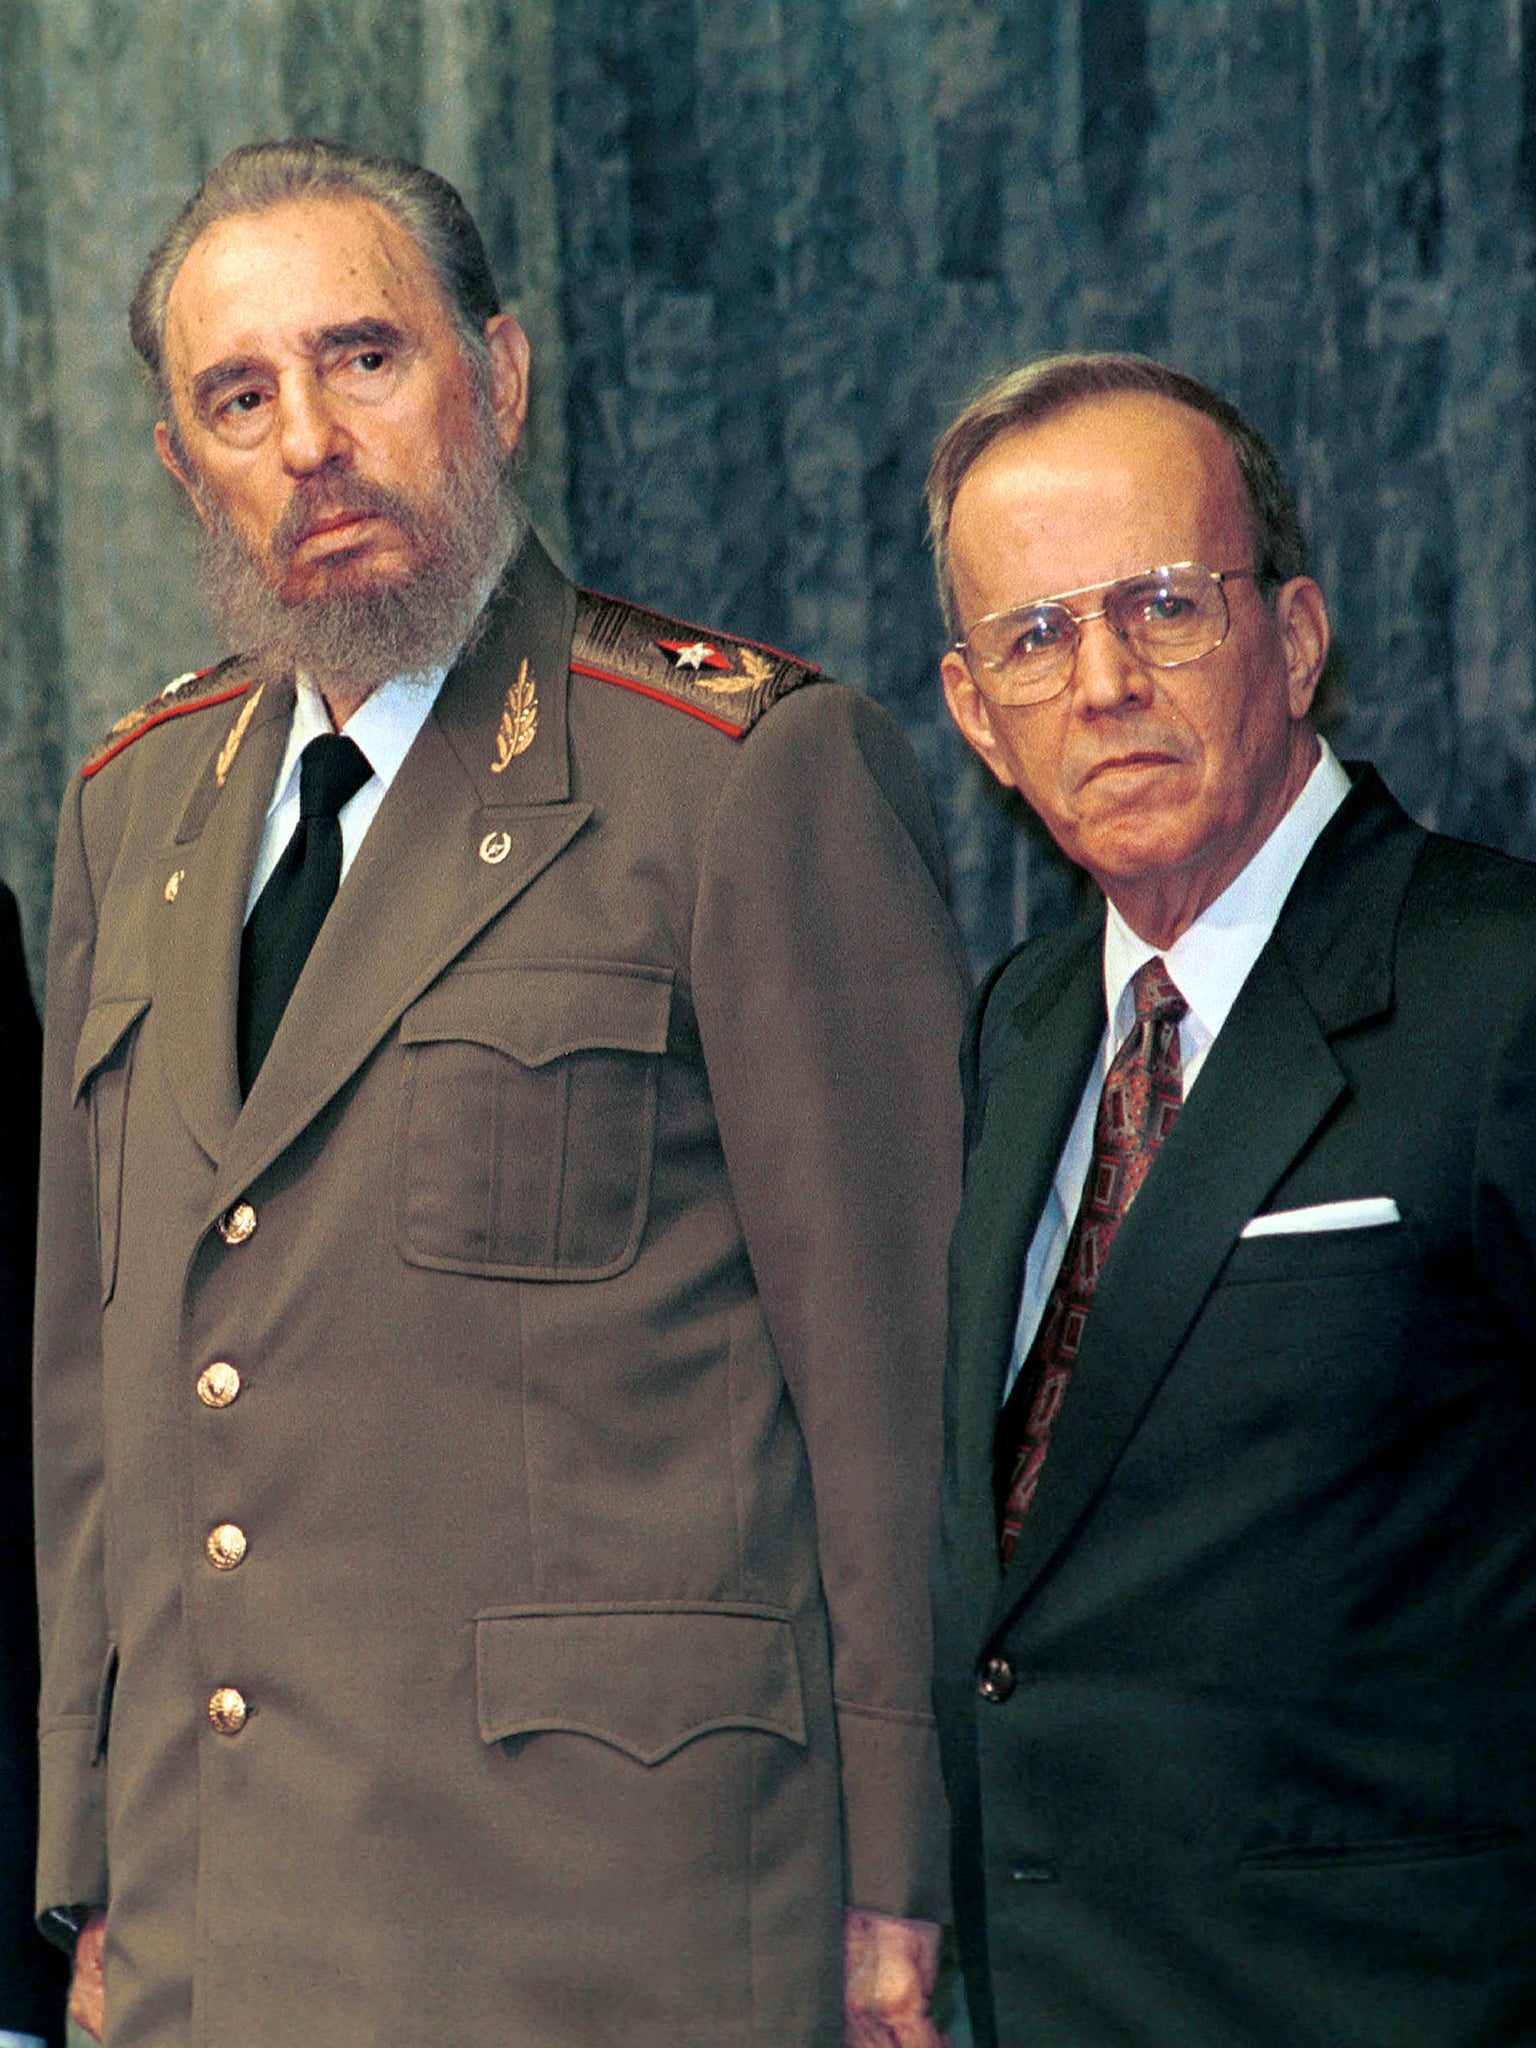 Alarcón was only 25 when Fidel Castro appointed him director of the Americas division at the foreign affairs ministry in 1962